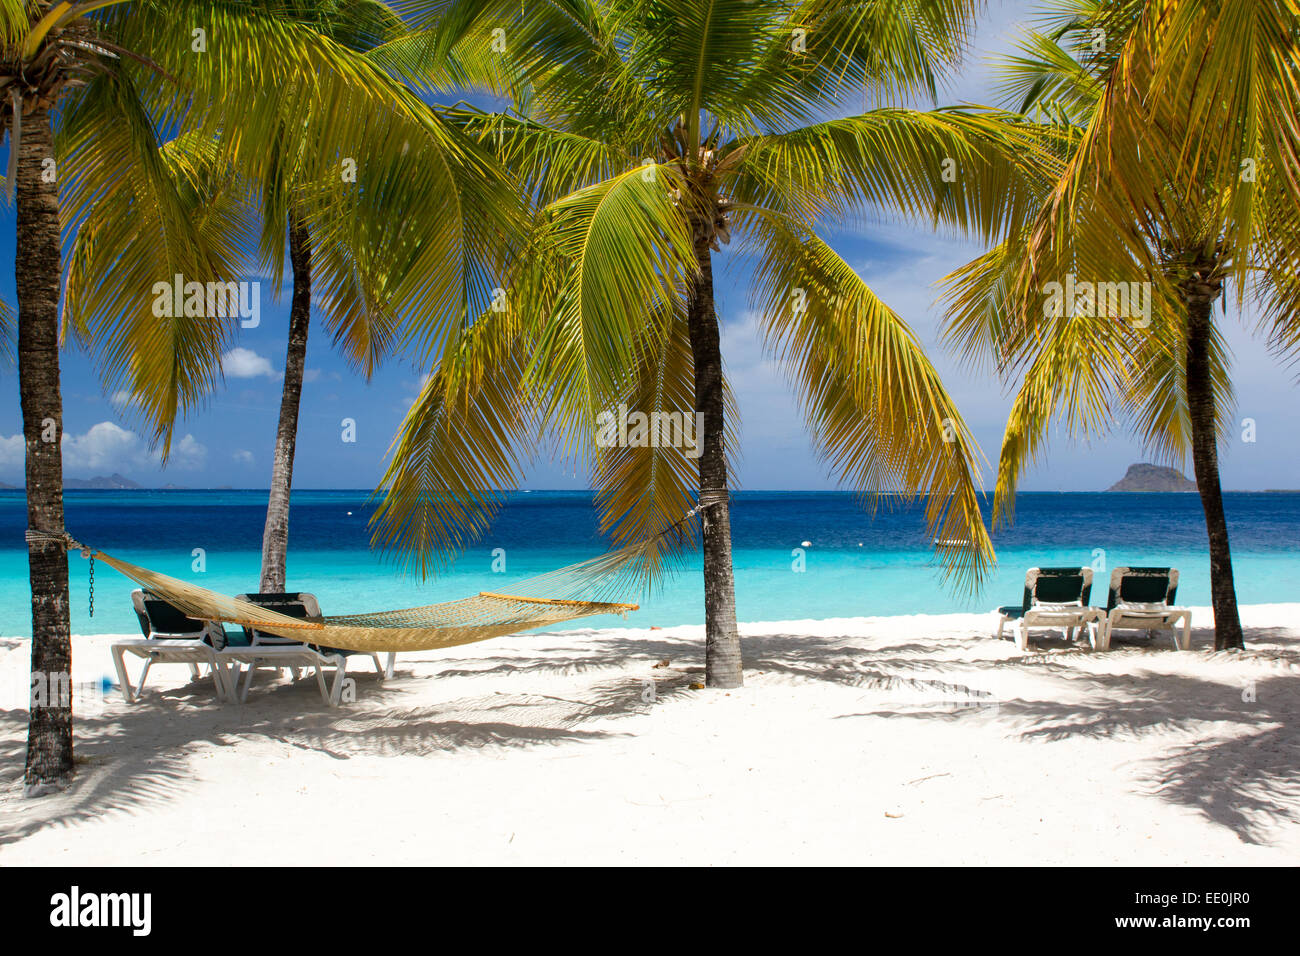 Stunning Tropical Beach Scene with Hammock, Sun Loungers Palm Trees with Shadows and Amazing Caribbean View. Stock Photo